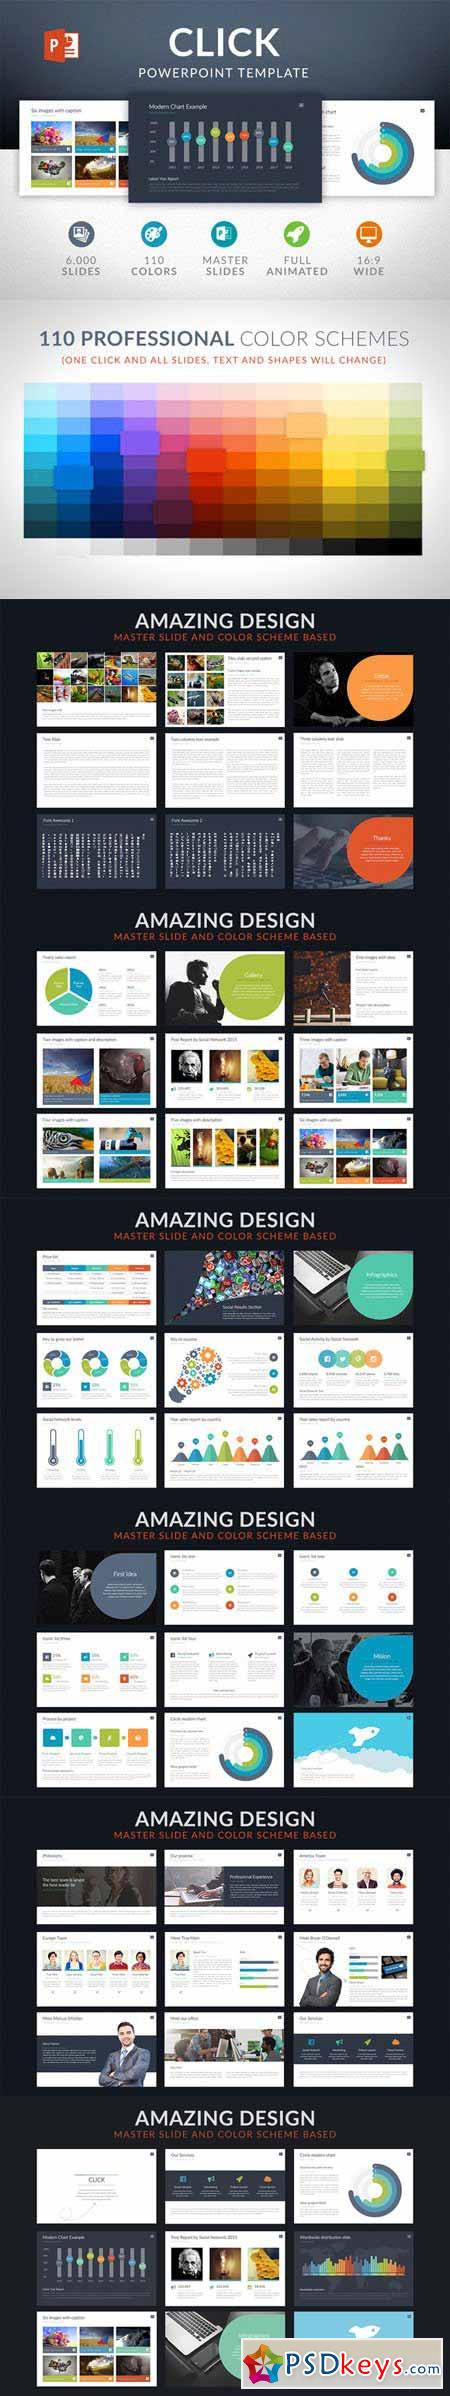 Click Powerpoint Template 430675